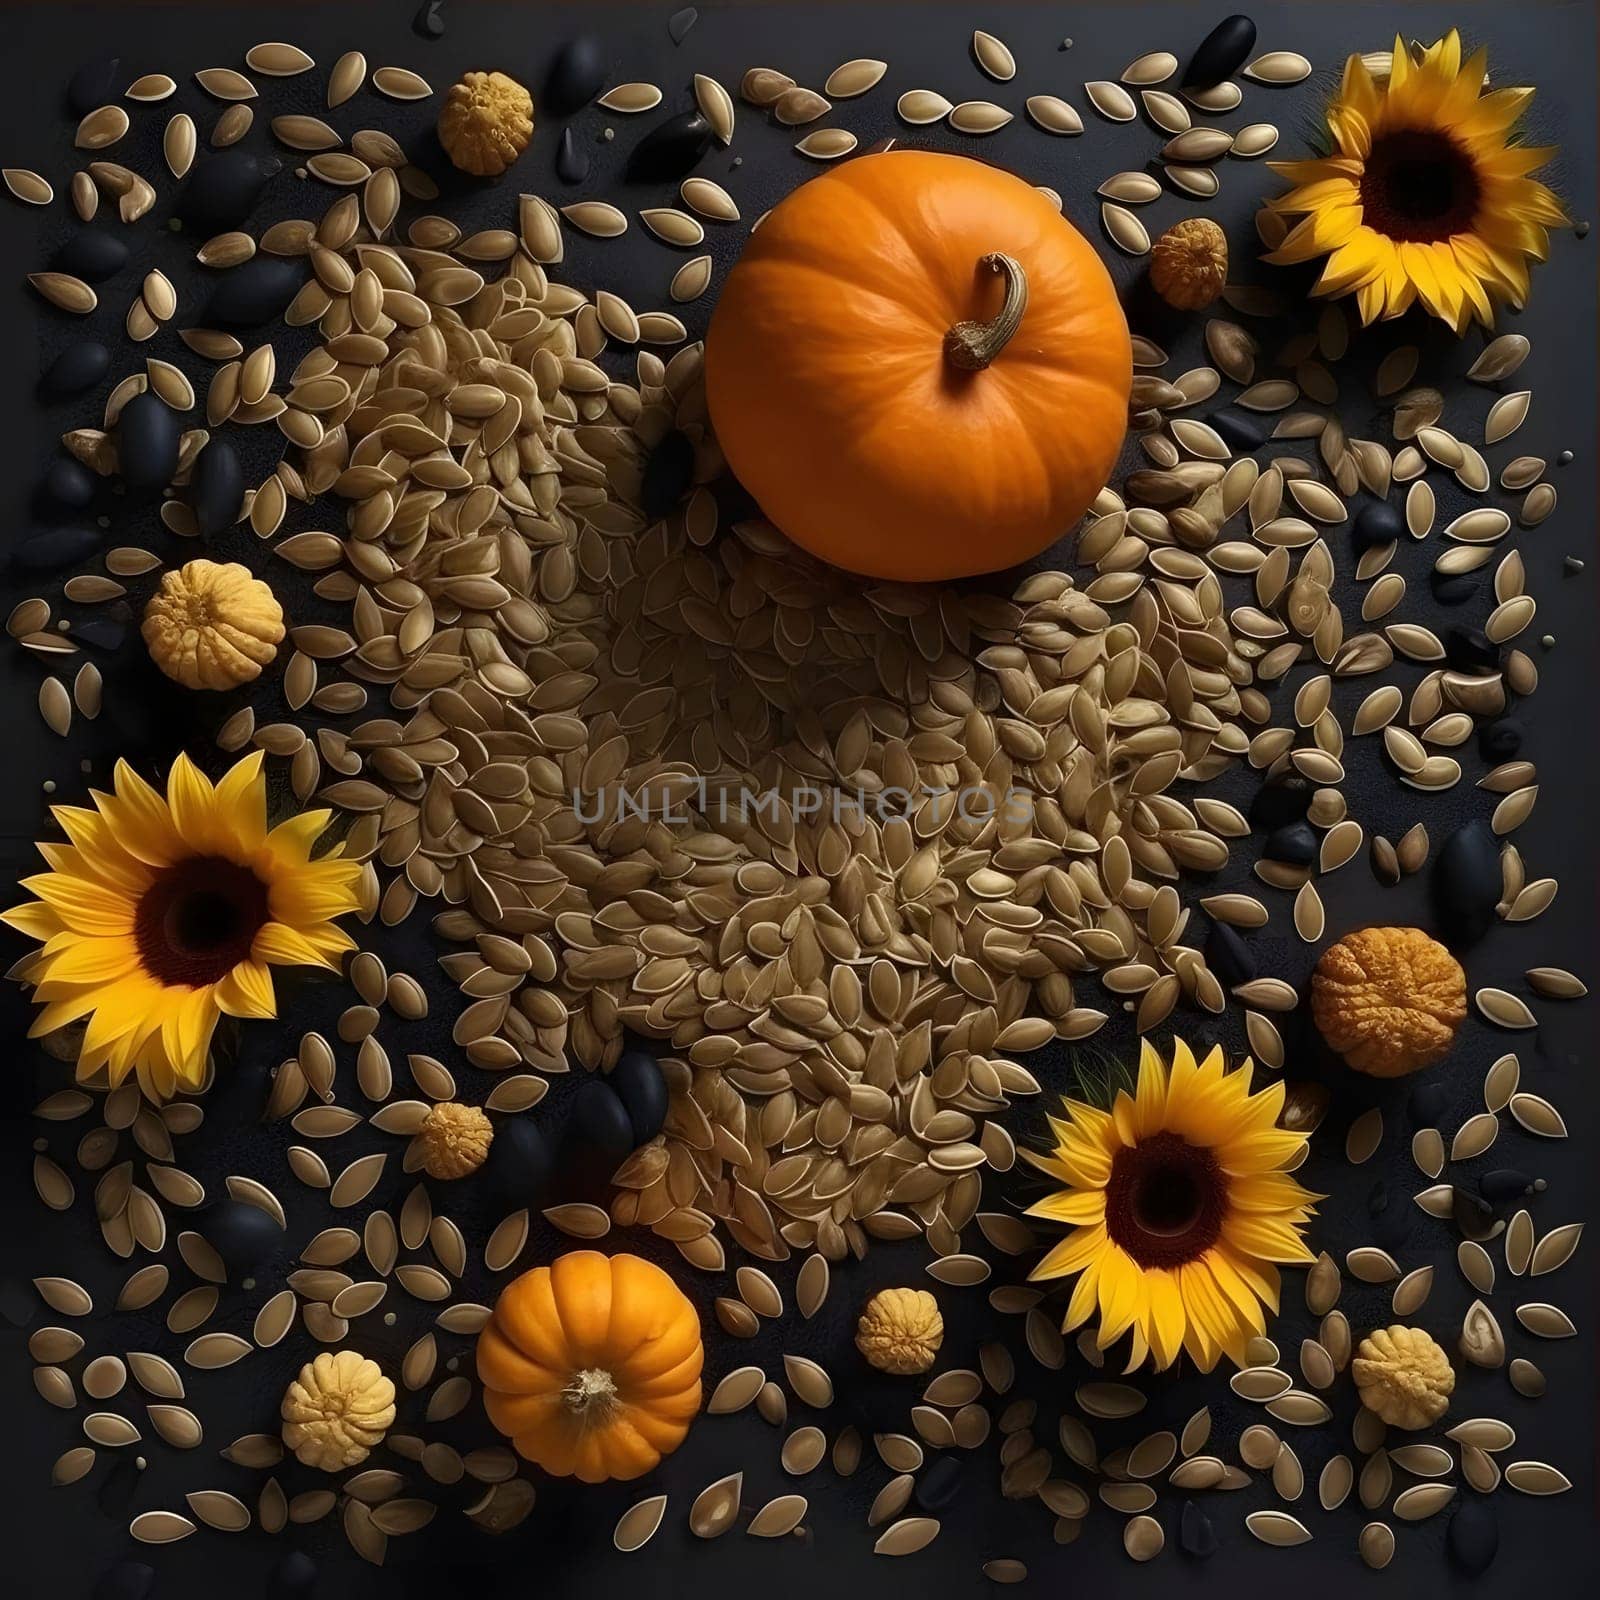 An aerial view of scattered pumpkin seeds and sunflowers and two pumpkins. Pumpkin as a dish of thanksgiving for the harvest. An atmosphere of joy and celebration.